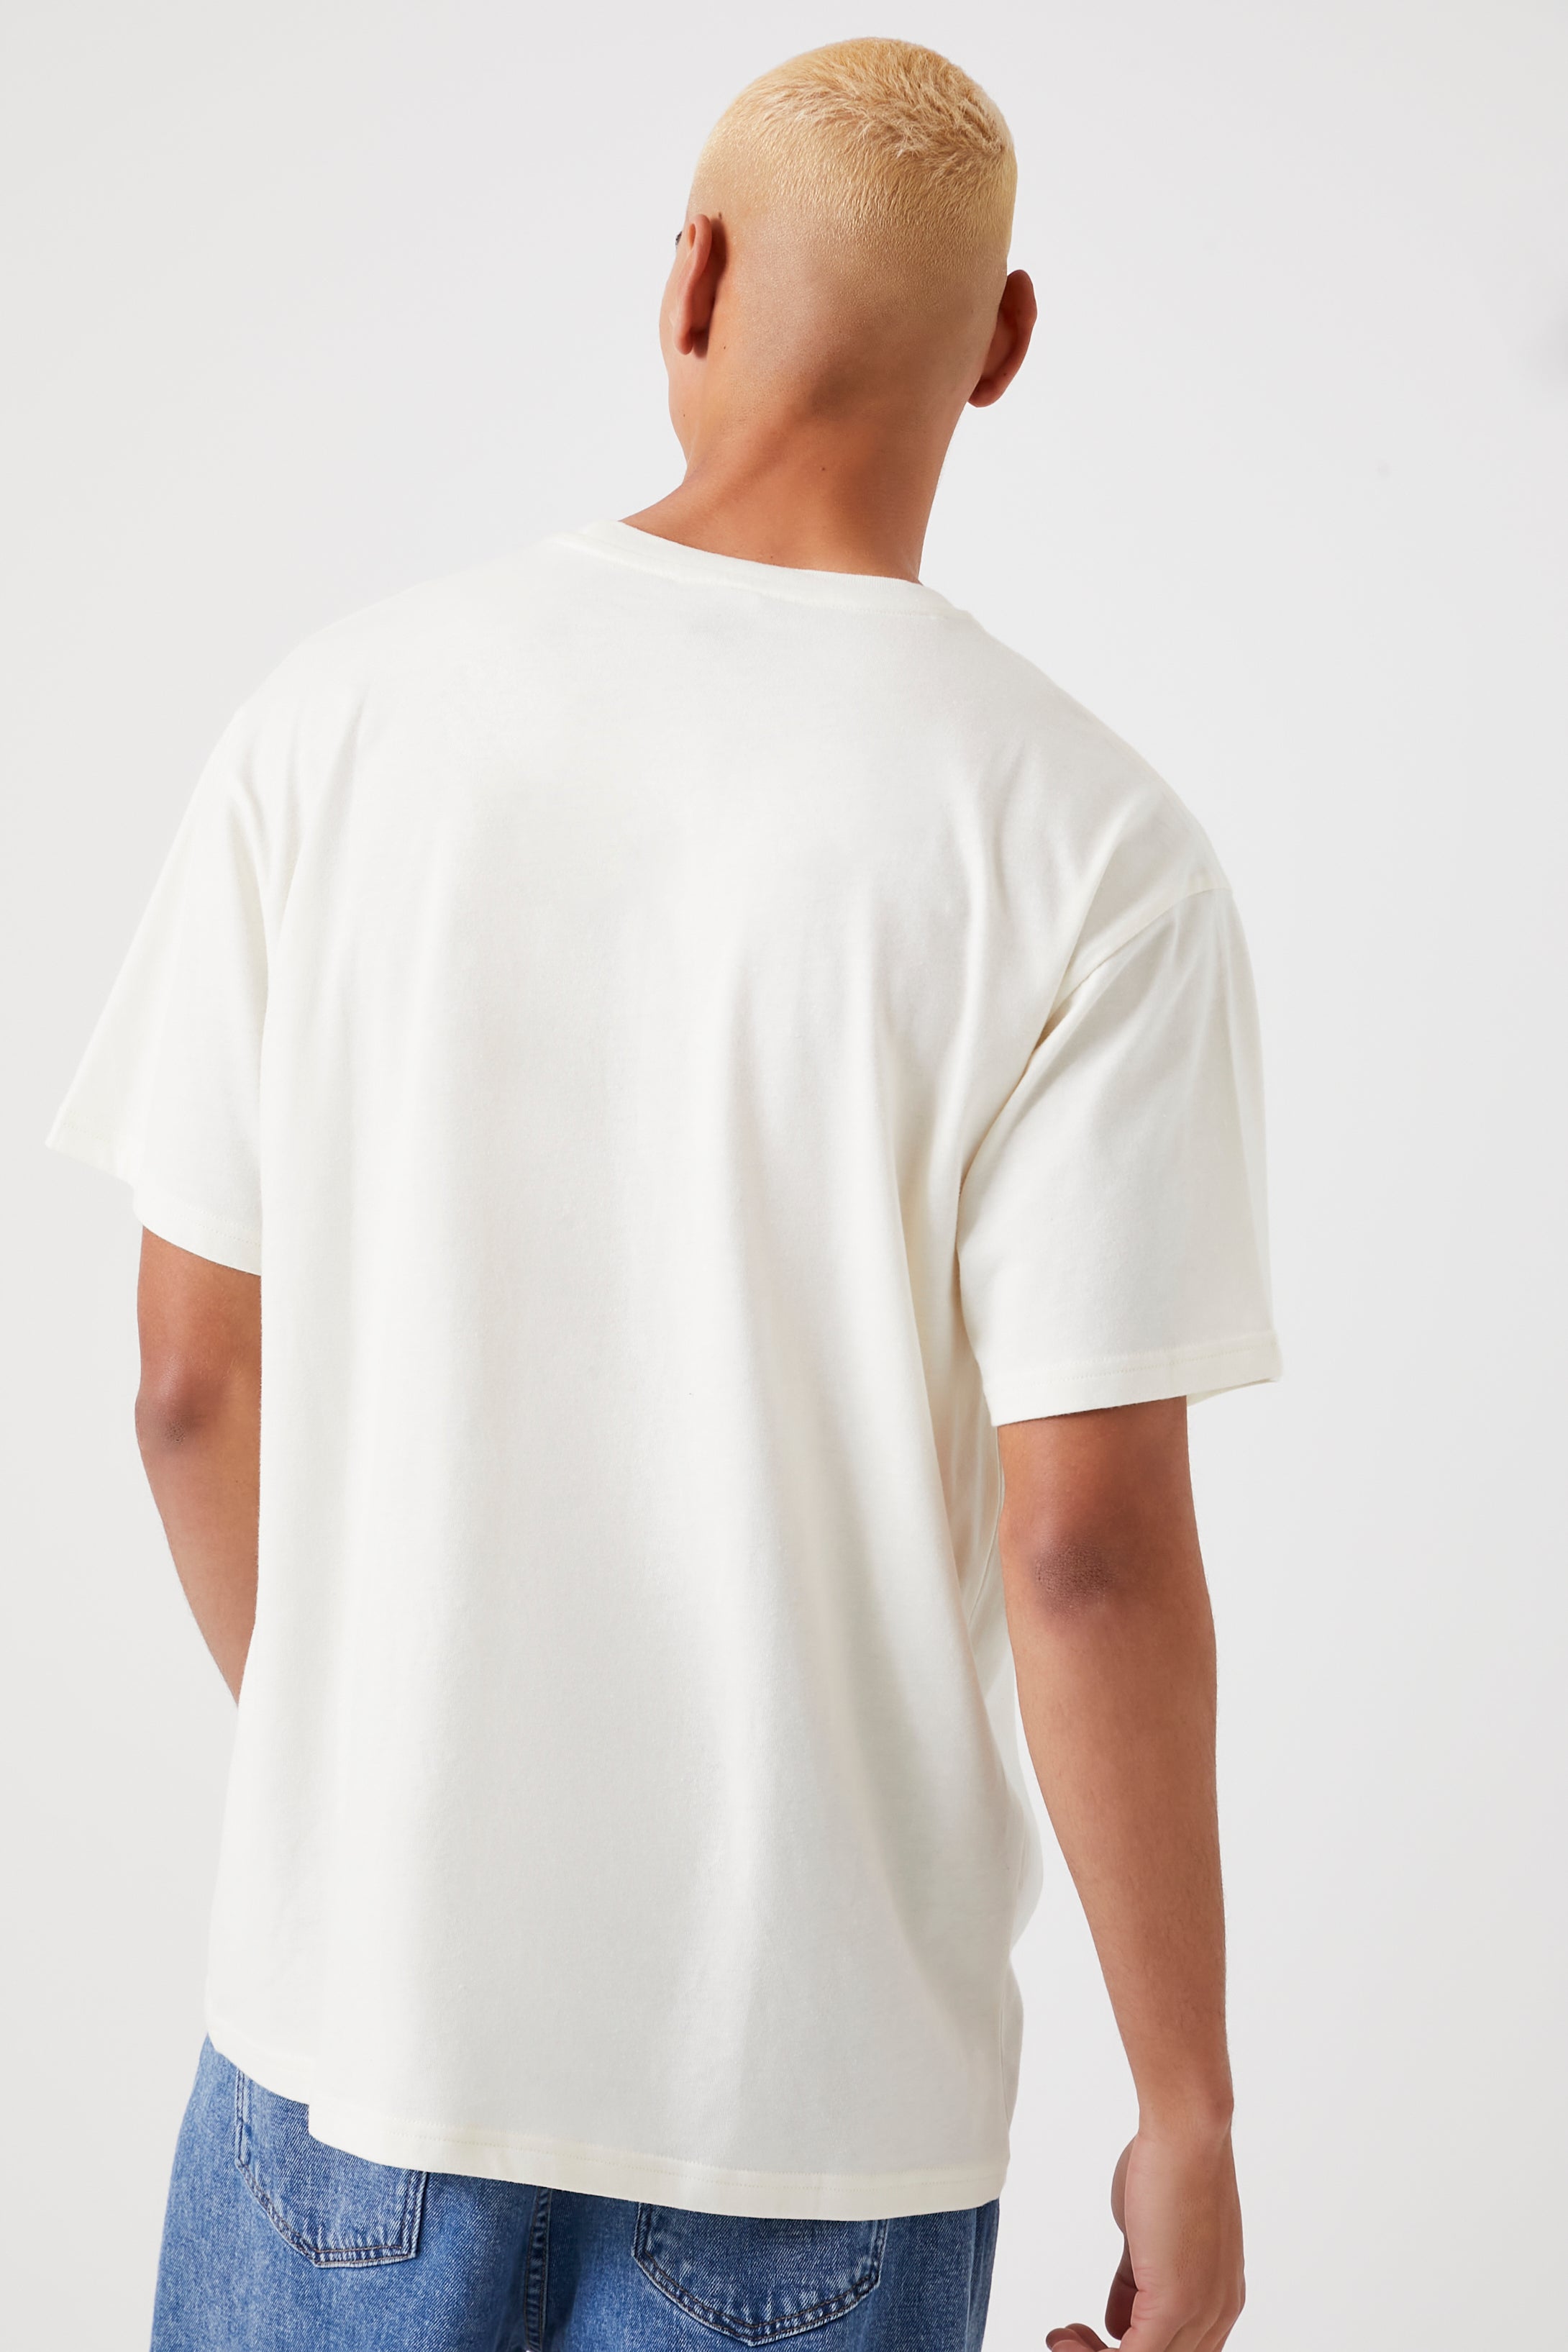 Creammulti Restless Youth Graphic Tee 2